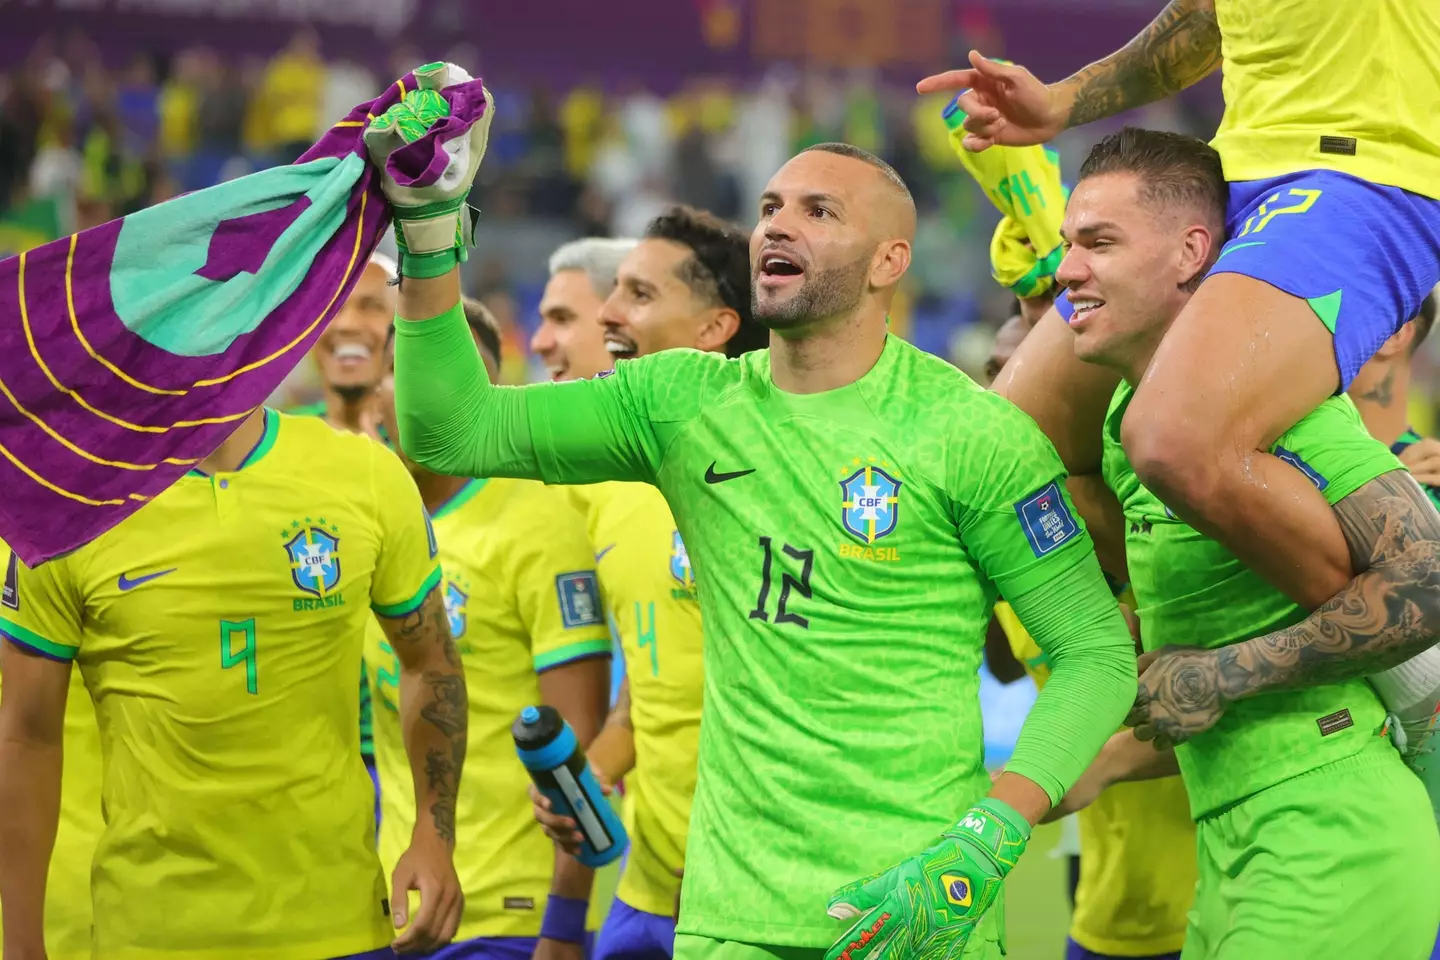 Weverton celebrates in front of the fans after Brazil's big win. Image: Alamy